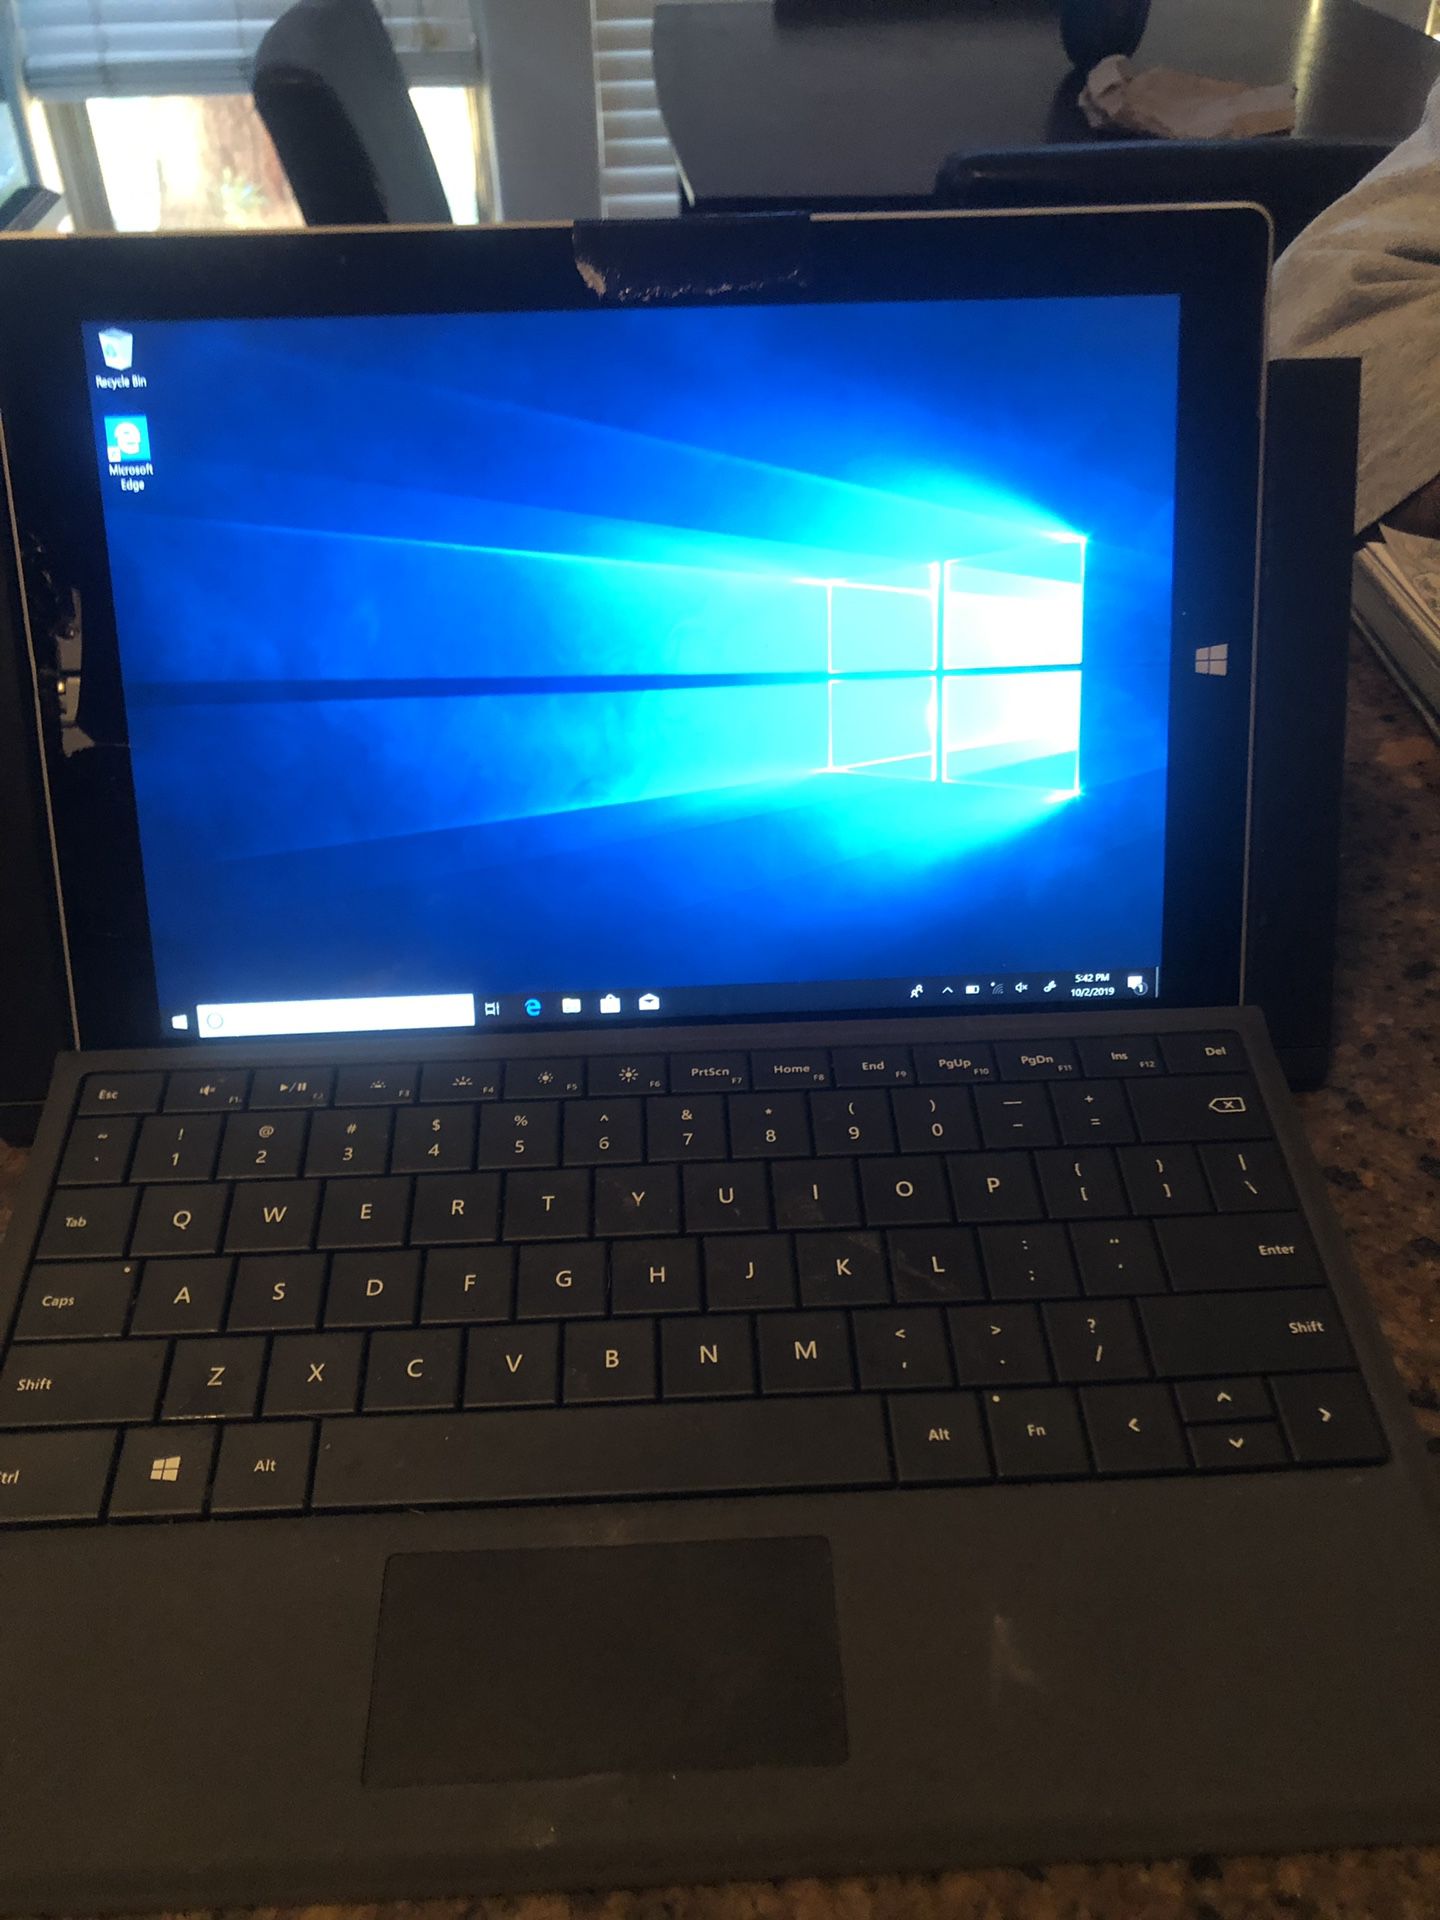 REDUCED*** Microsoft Surface Pro 3 (screen broken on one side)